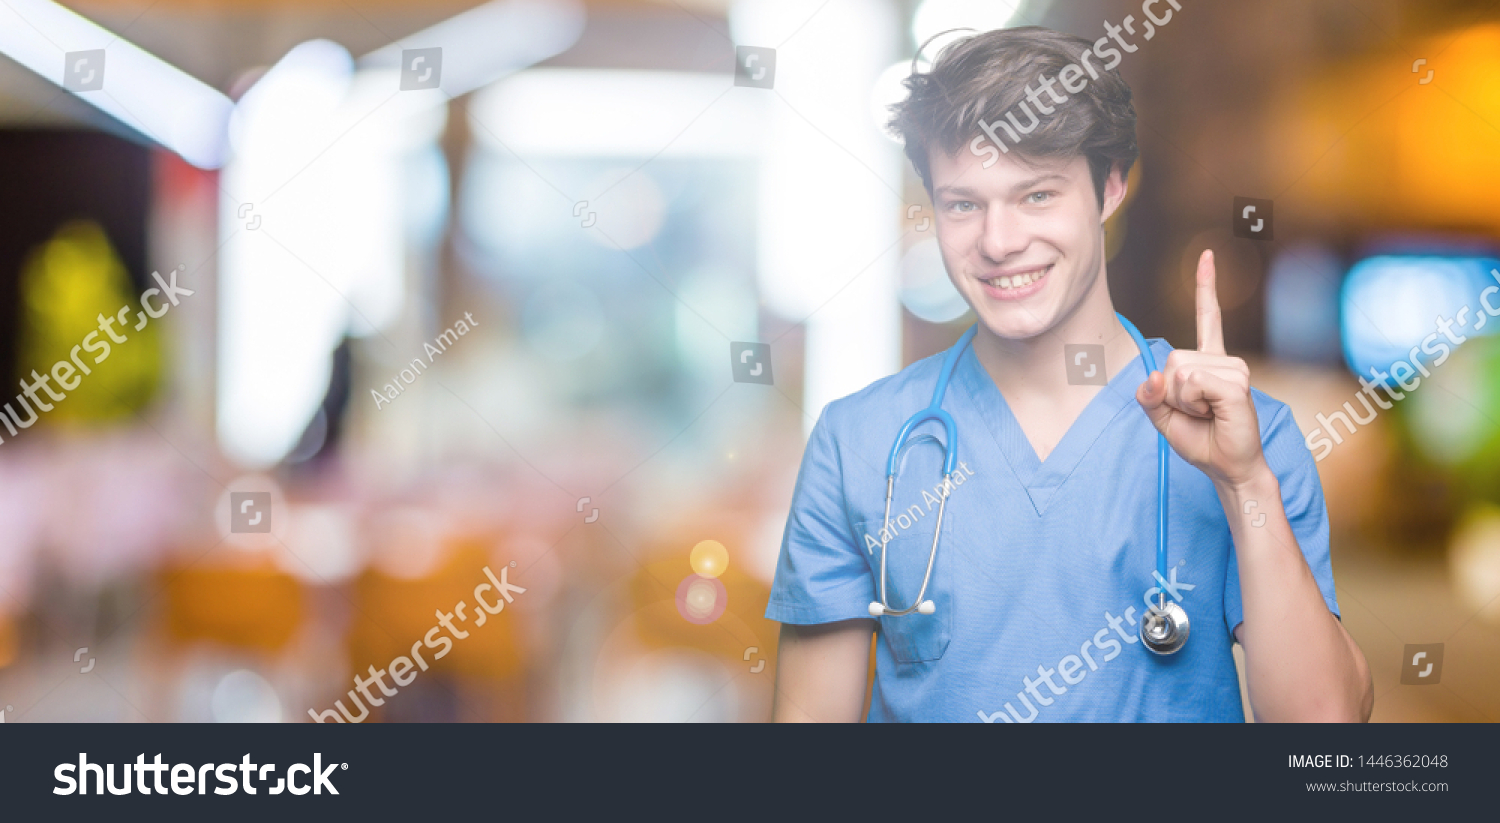 Young doctor wearing medical uniform over isolated background showing and pointing up with finger number one while smiling confident and happy. #1446362048